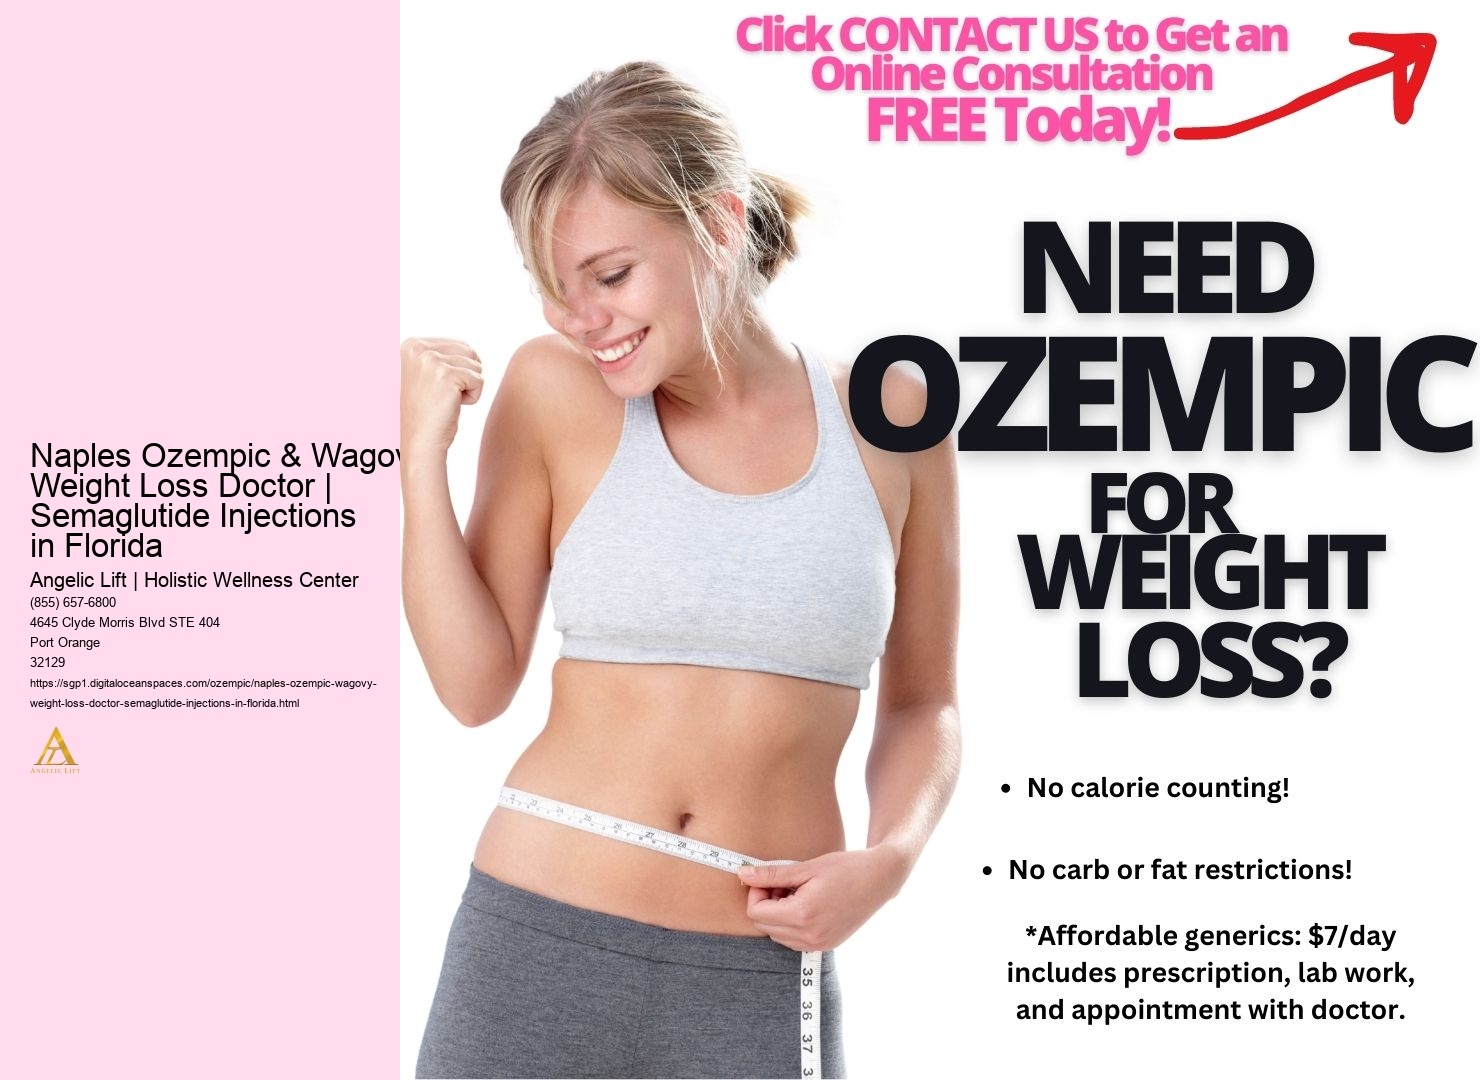 Naples Ozempic & Wagovy Weight Loss Doctor | Semaglutide Injections in Florida